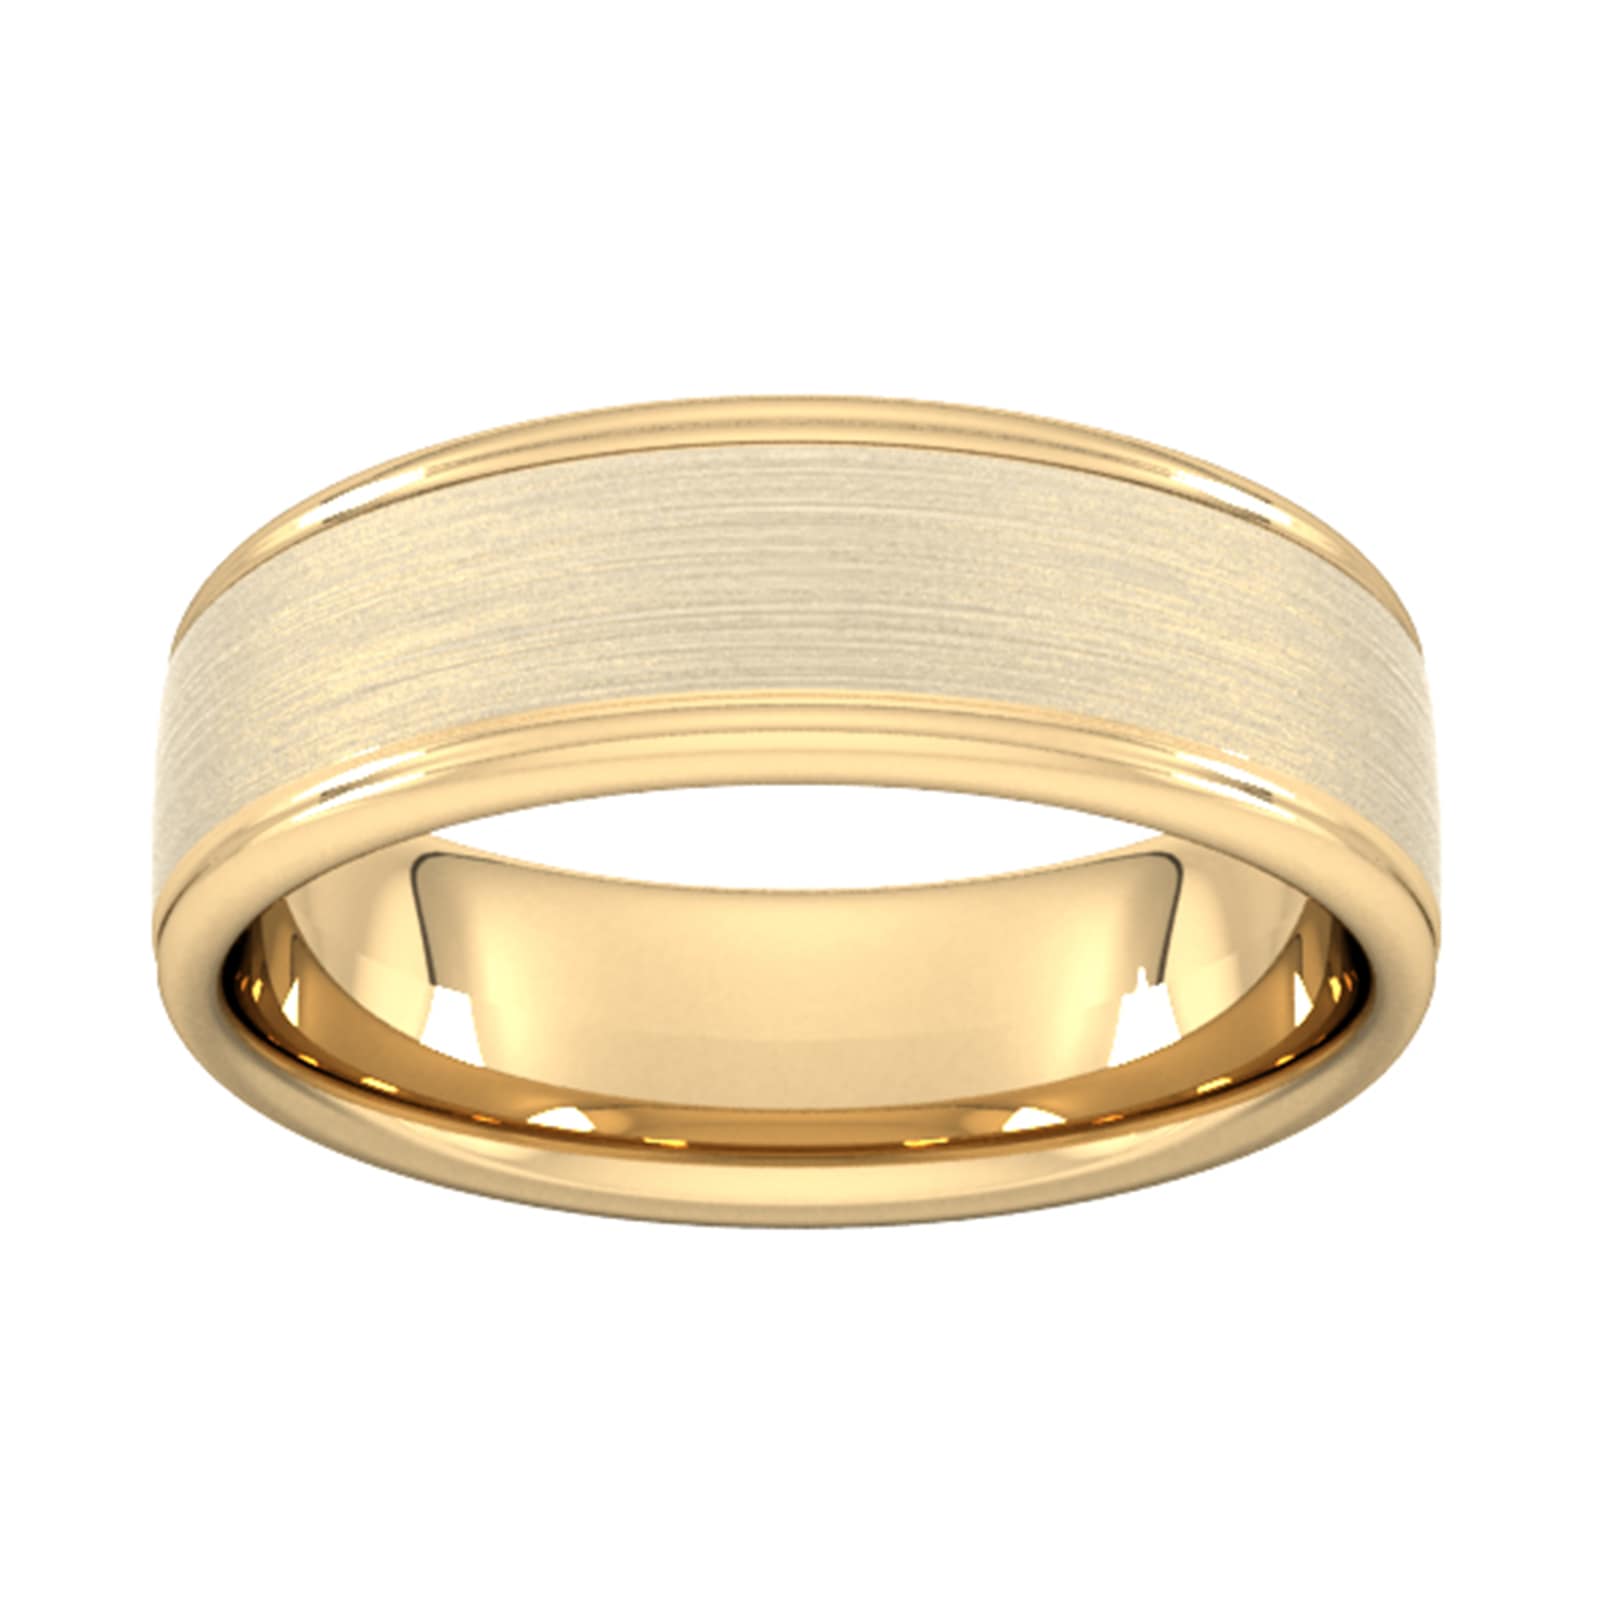 7mm D Shape Heavy Matt Centre With Grooves Wedding Ring In 9 Carat Yellow Gold - Ring Size J